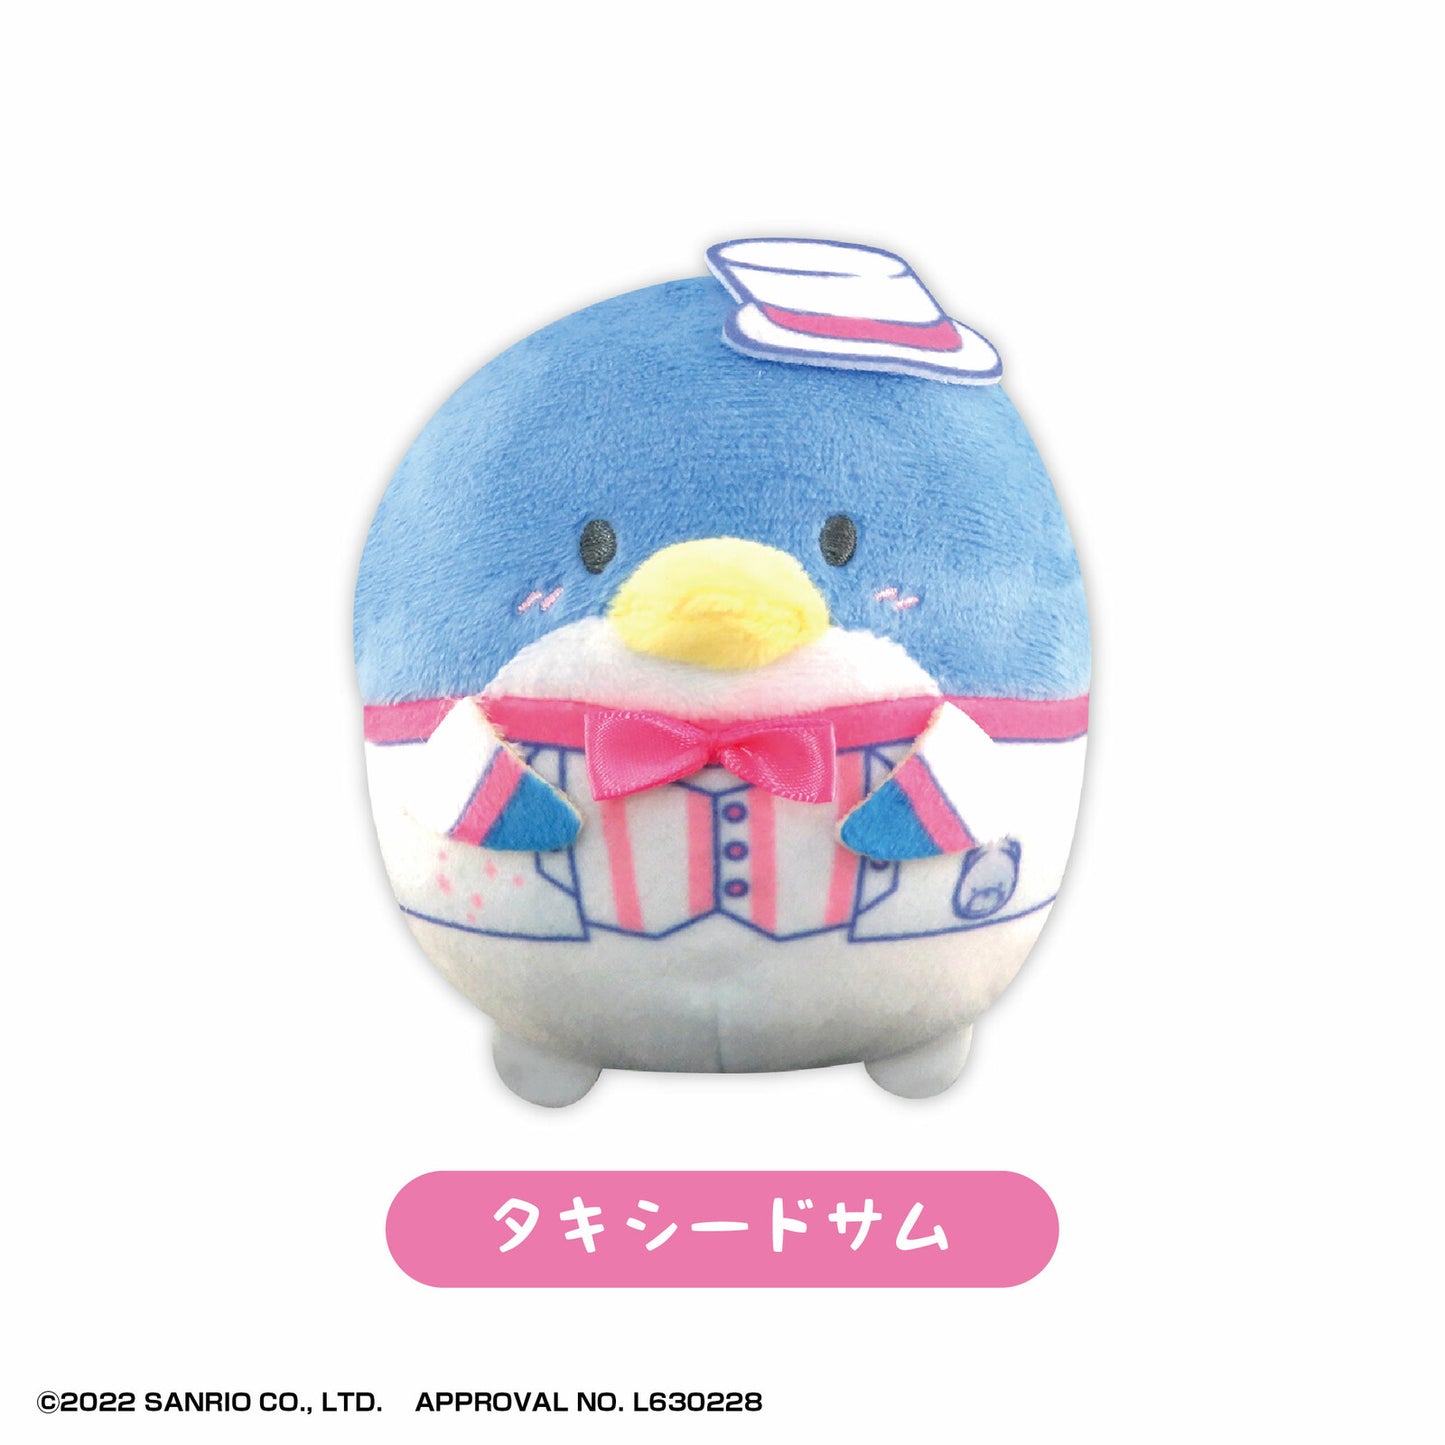  Sanrio Characters Soft Round Toy 2 